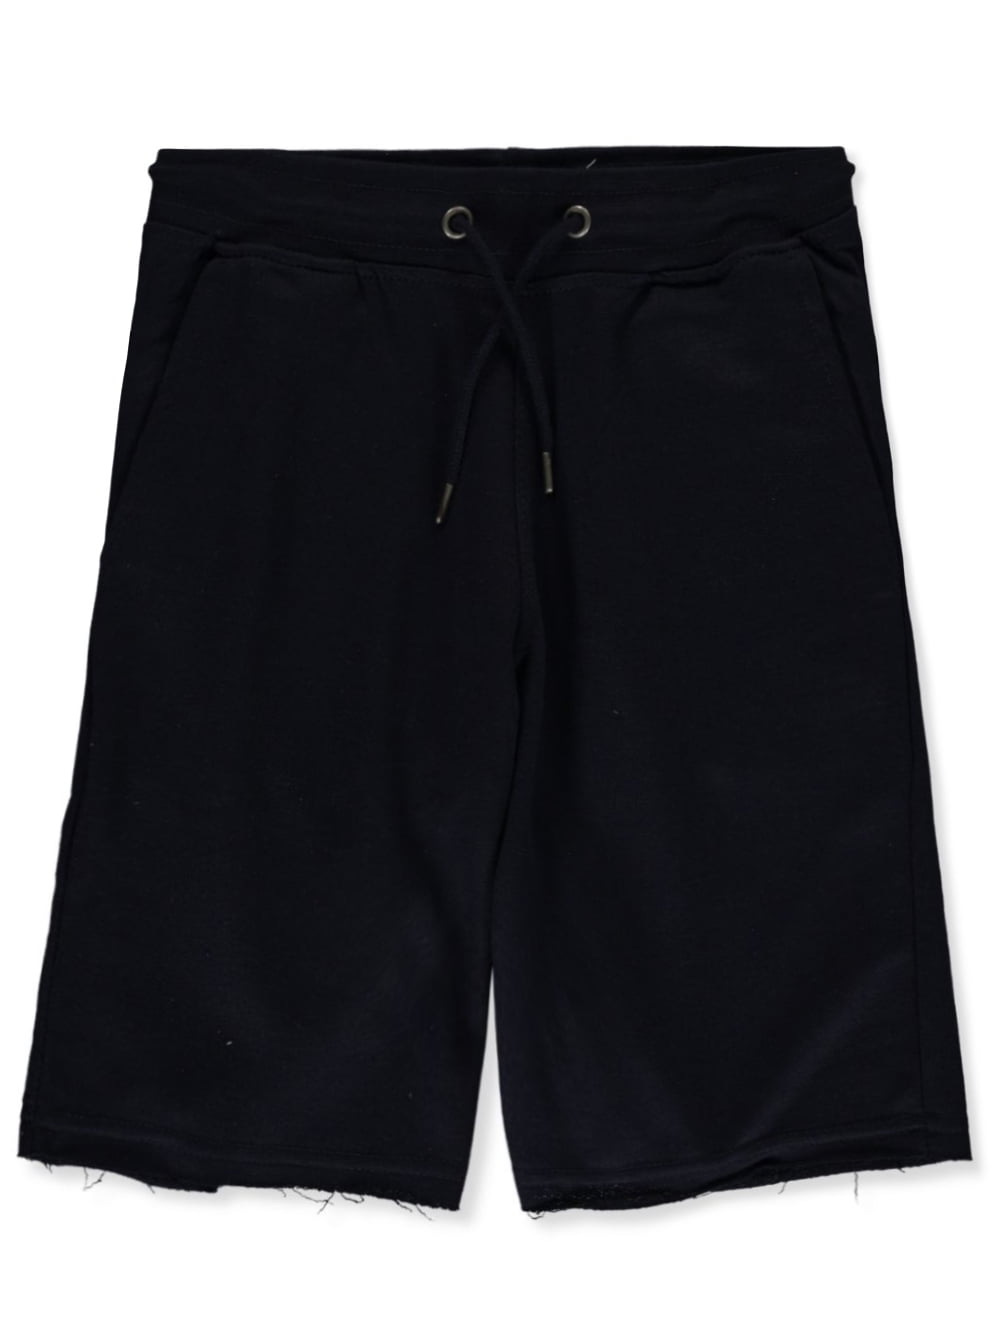 Evolution In Design Boys' Cut-Off Terry Shorts - navy, 2t (Toddler ...